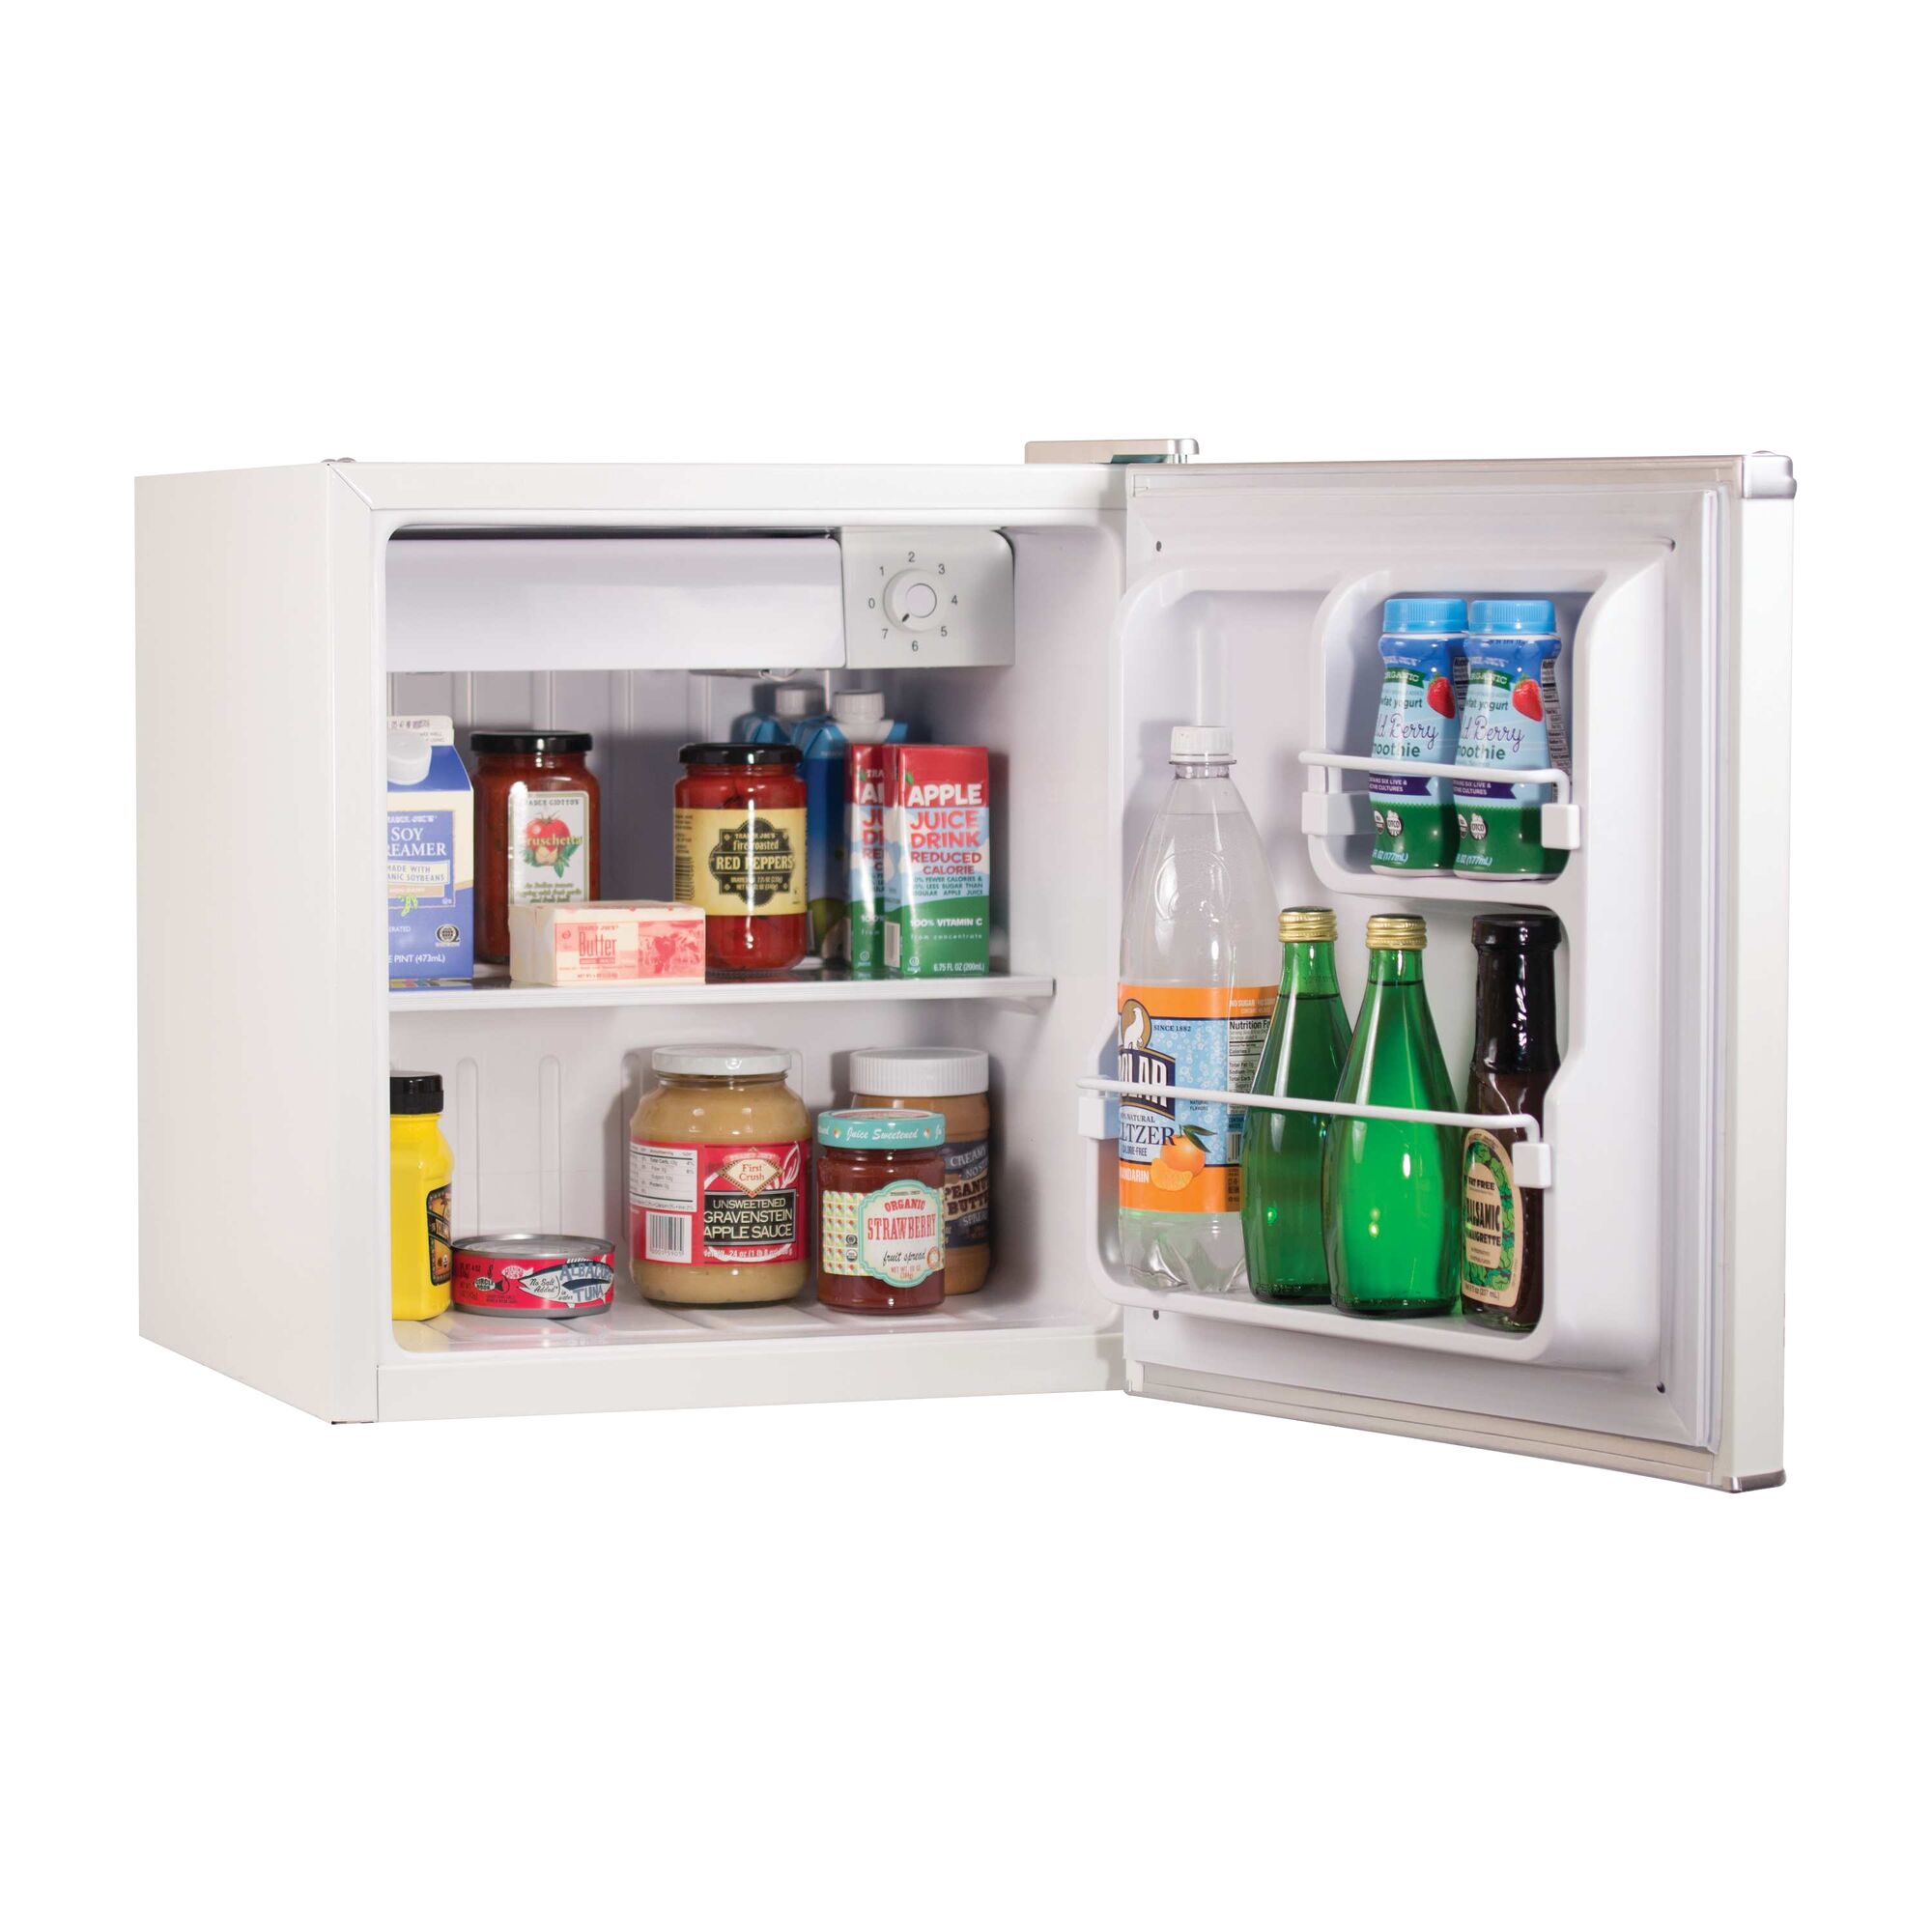 Left profile of 1.7 cubic feet energy star refrigerator with freezer.